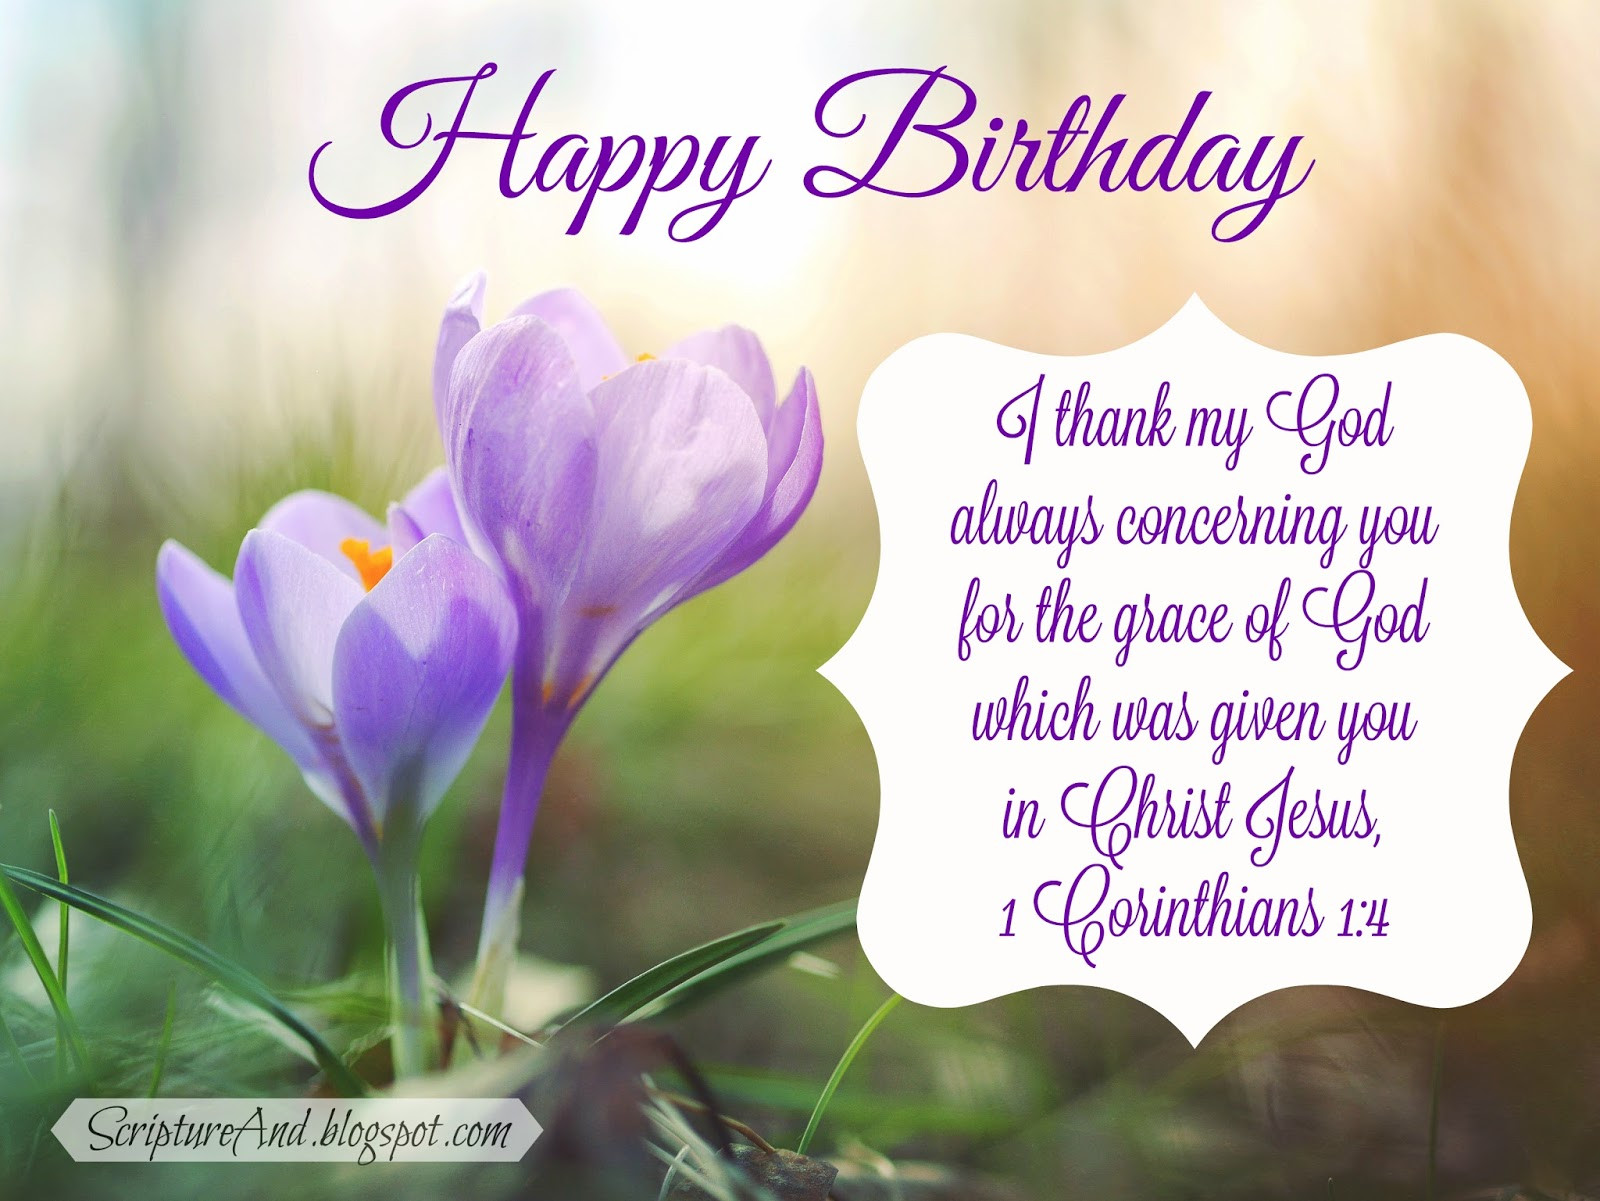 Birthday Wishes Bible Verses
 Scripture and Free Birthday with Bible Verses